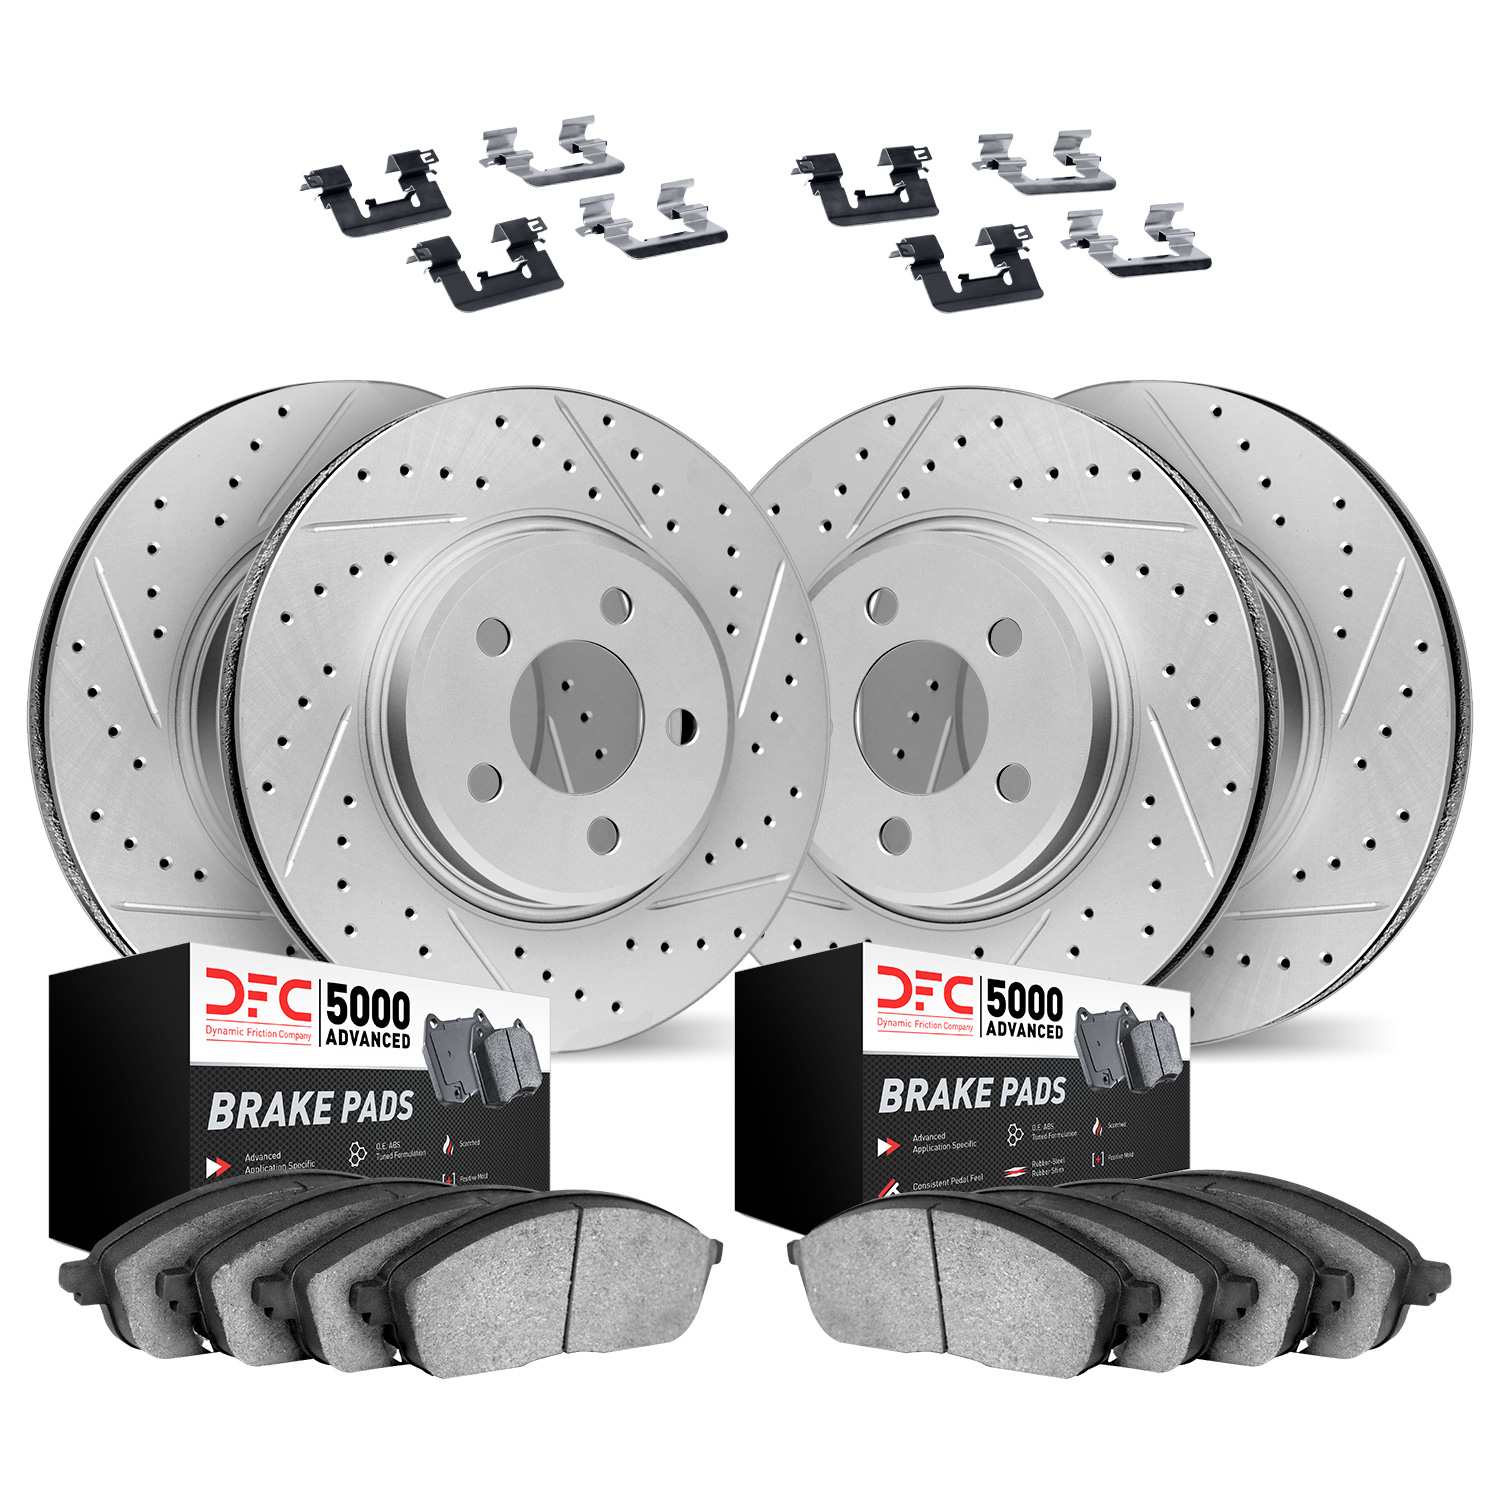 2514-31053 Geoperformance Drilled/Slotted Rotors w/5000 Advanced Brake Pads Kit & Hardware, 2017-2020 BMW, Position: Front and R